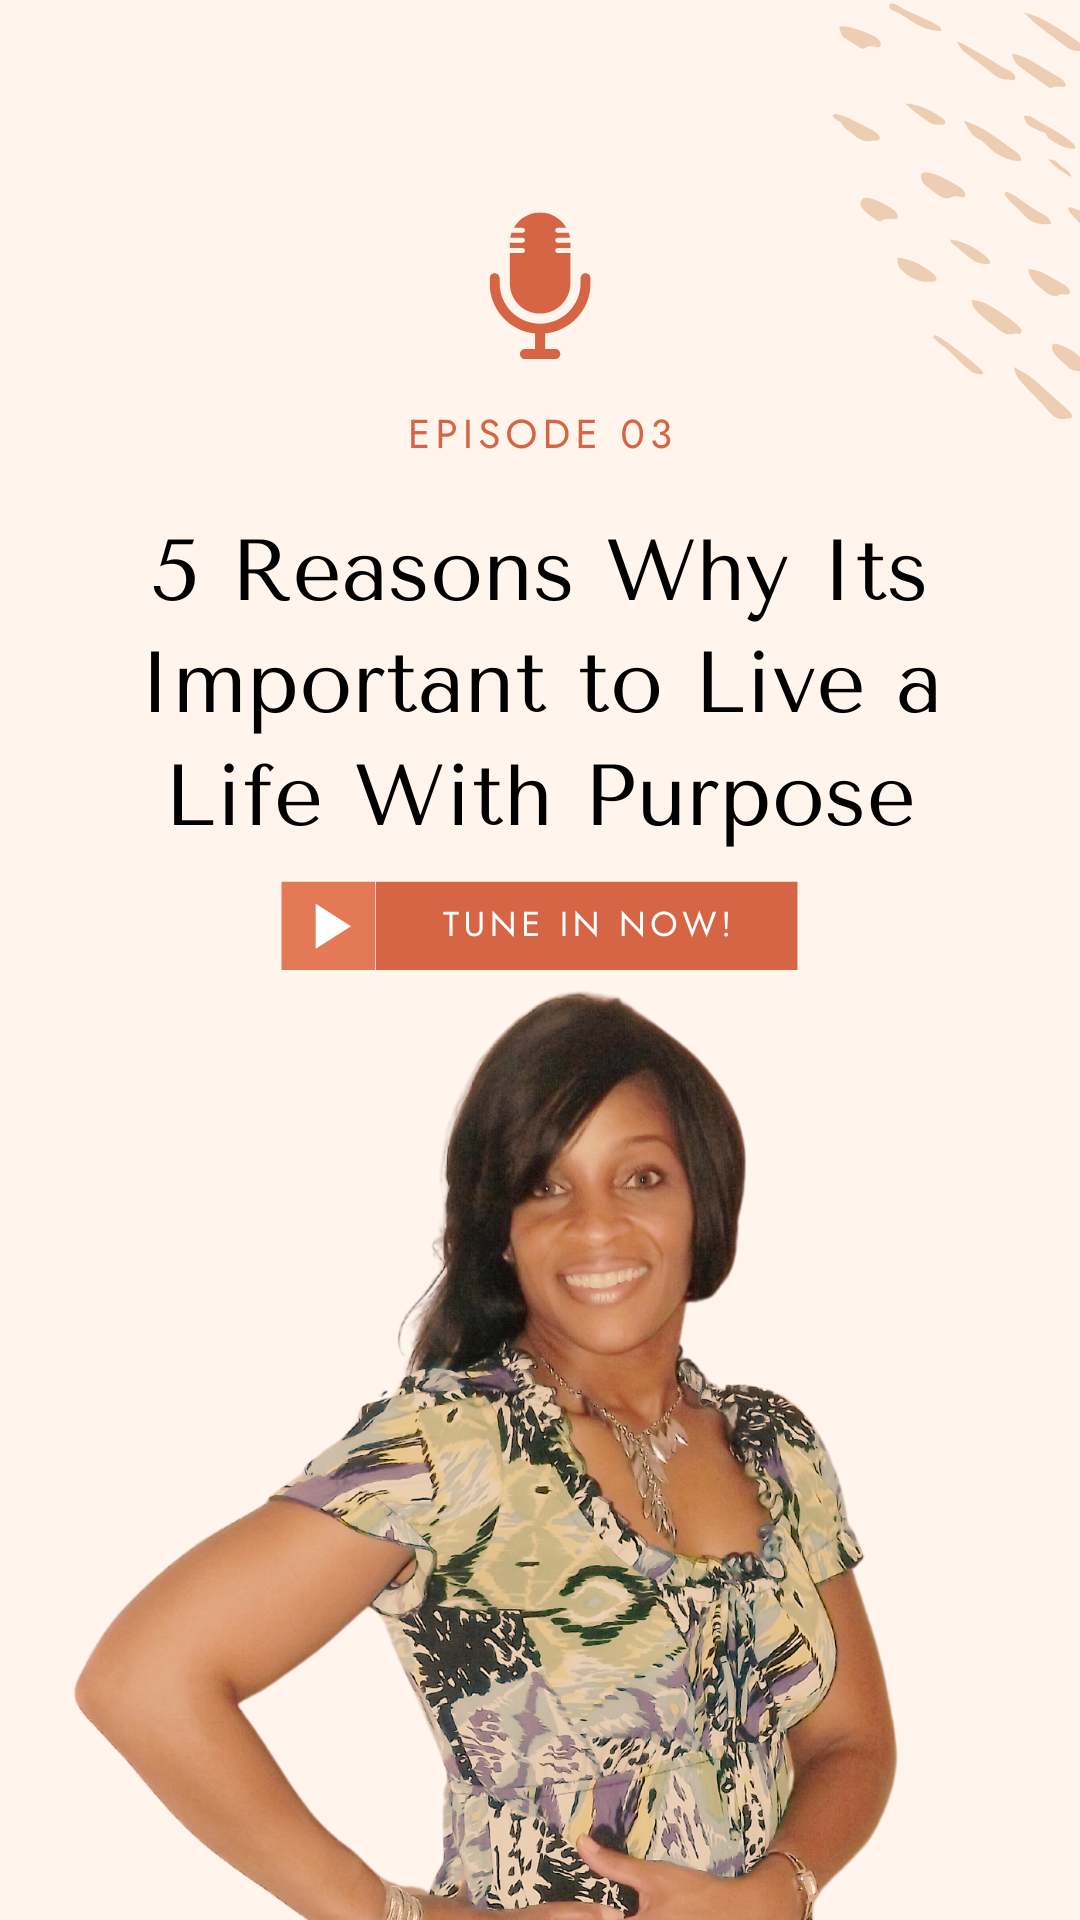 5 Reasons Why Its Important to Live a Life With Purpose